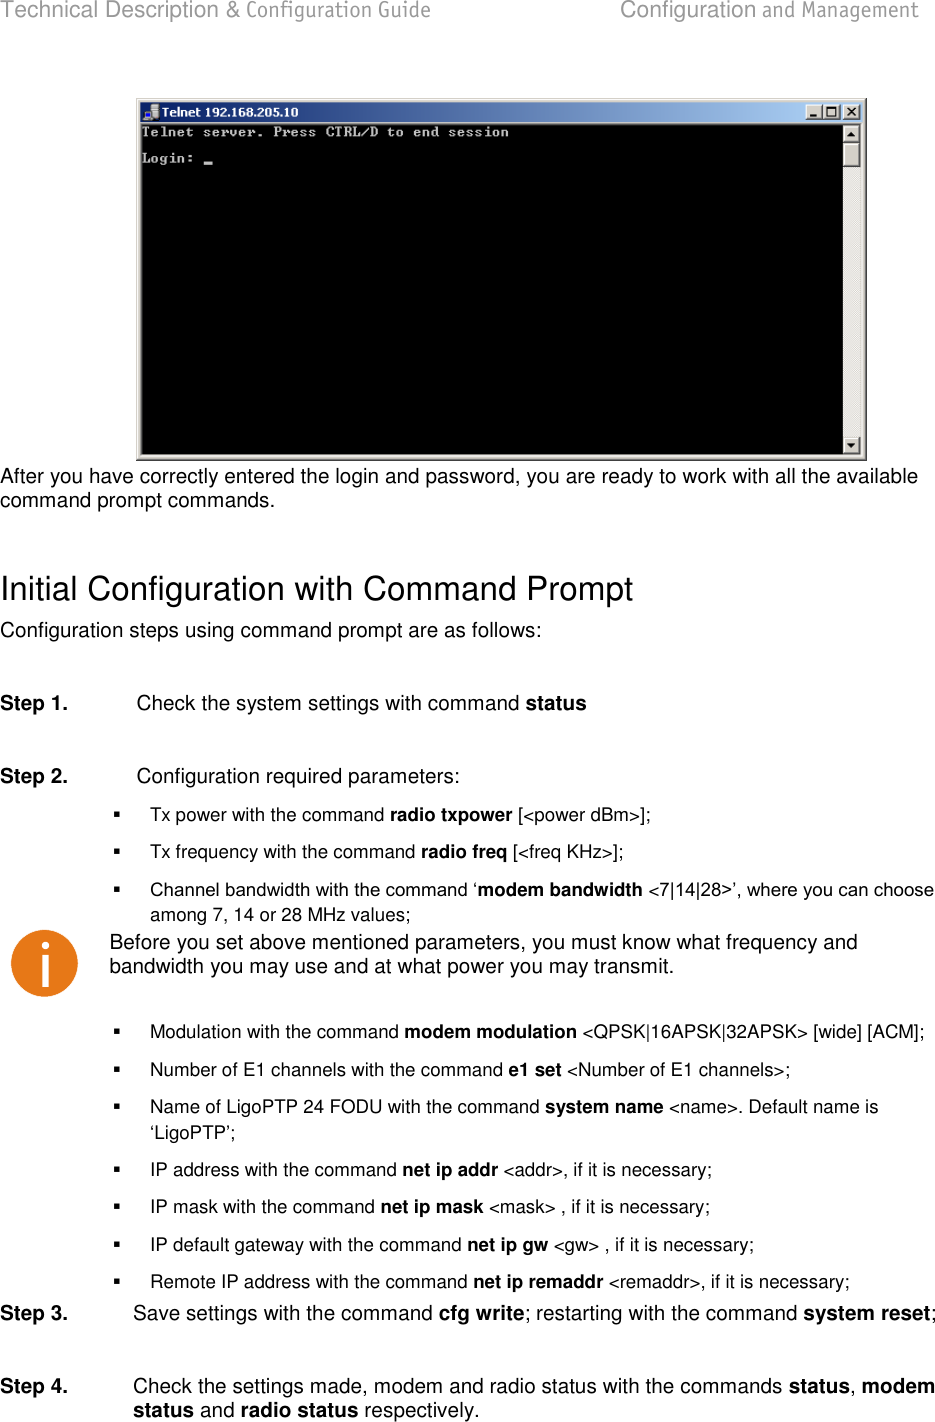 Technical Description &amp; Configuration Guide  Configuration and Management  LigoWave  Page 31  After you have correctly entered the login and password, you are ready to work with all the available command prompt commands.   Initial Configuration with Command Prompt Configuration steps using command prompt are as follows:  Step 1.  Check the system settings with command status  Step 2.  Configuration required parameters:   Tx power with the command radio txpower [&lt;power dBm&gt;];   Tx frequency with the command radio freq [&lt;freq KHz&gt;];  modem bandwidth &lt;among 7, 14 or 28 MHz values;  Before you set above mentioned parameters, you must know what frequency and bandwidth you may use and at what power you may transmit.   Modulation with the command modem modulation &lt;QPSK|16APSK|32APSK&gt; [wide] [ACM];   Number of E1 channels with the command e1 set &lt;Number of E1 channels&gt;;   Name of LigoPTP 24 FODU with the command system name &lt;name&gt;. Default name is LigoPTP   IP address with the command net ip addr &lt;addr&gt;, if it is necessary;   IP mask with the command net ip mask &lt;mask&gt; , if it is necessary;   IP default gateway with the command net ip gw &lt;gw&gt; , if it is necessary;   Remote IP address with the command net ip remaddr &lt;remaddr&gt;, if it is necessary; Step 3.  Save settings with the command cfg write; restarting with the command system reset;  Step 4.  Check the settings made, modem and radio status with the commands status, modem status and radio status respectively.    